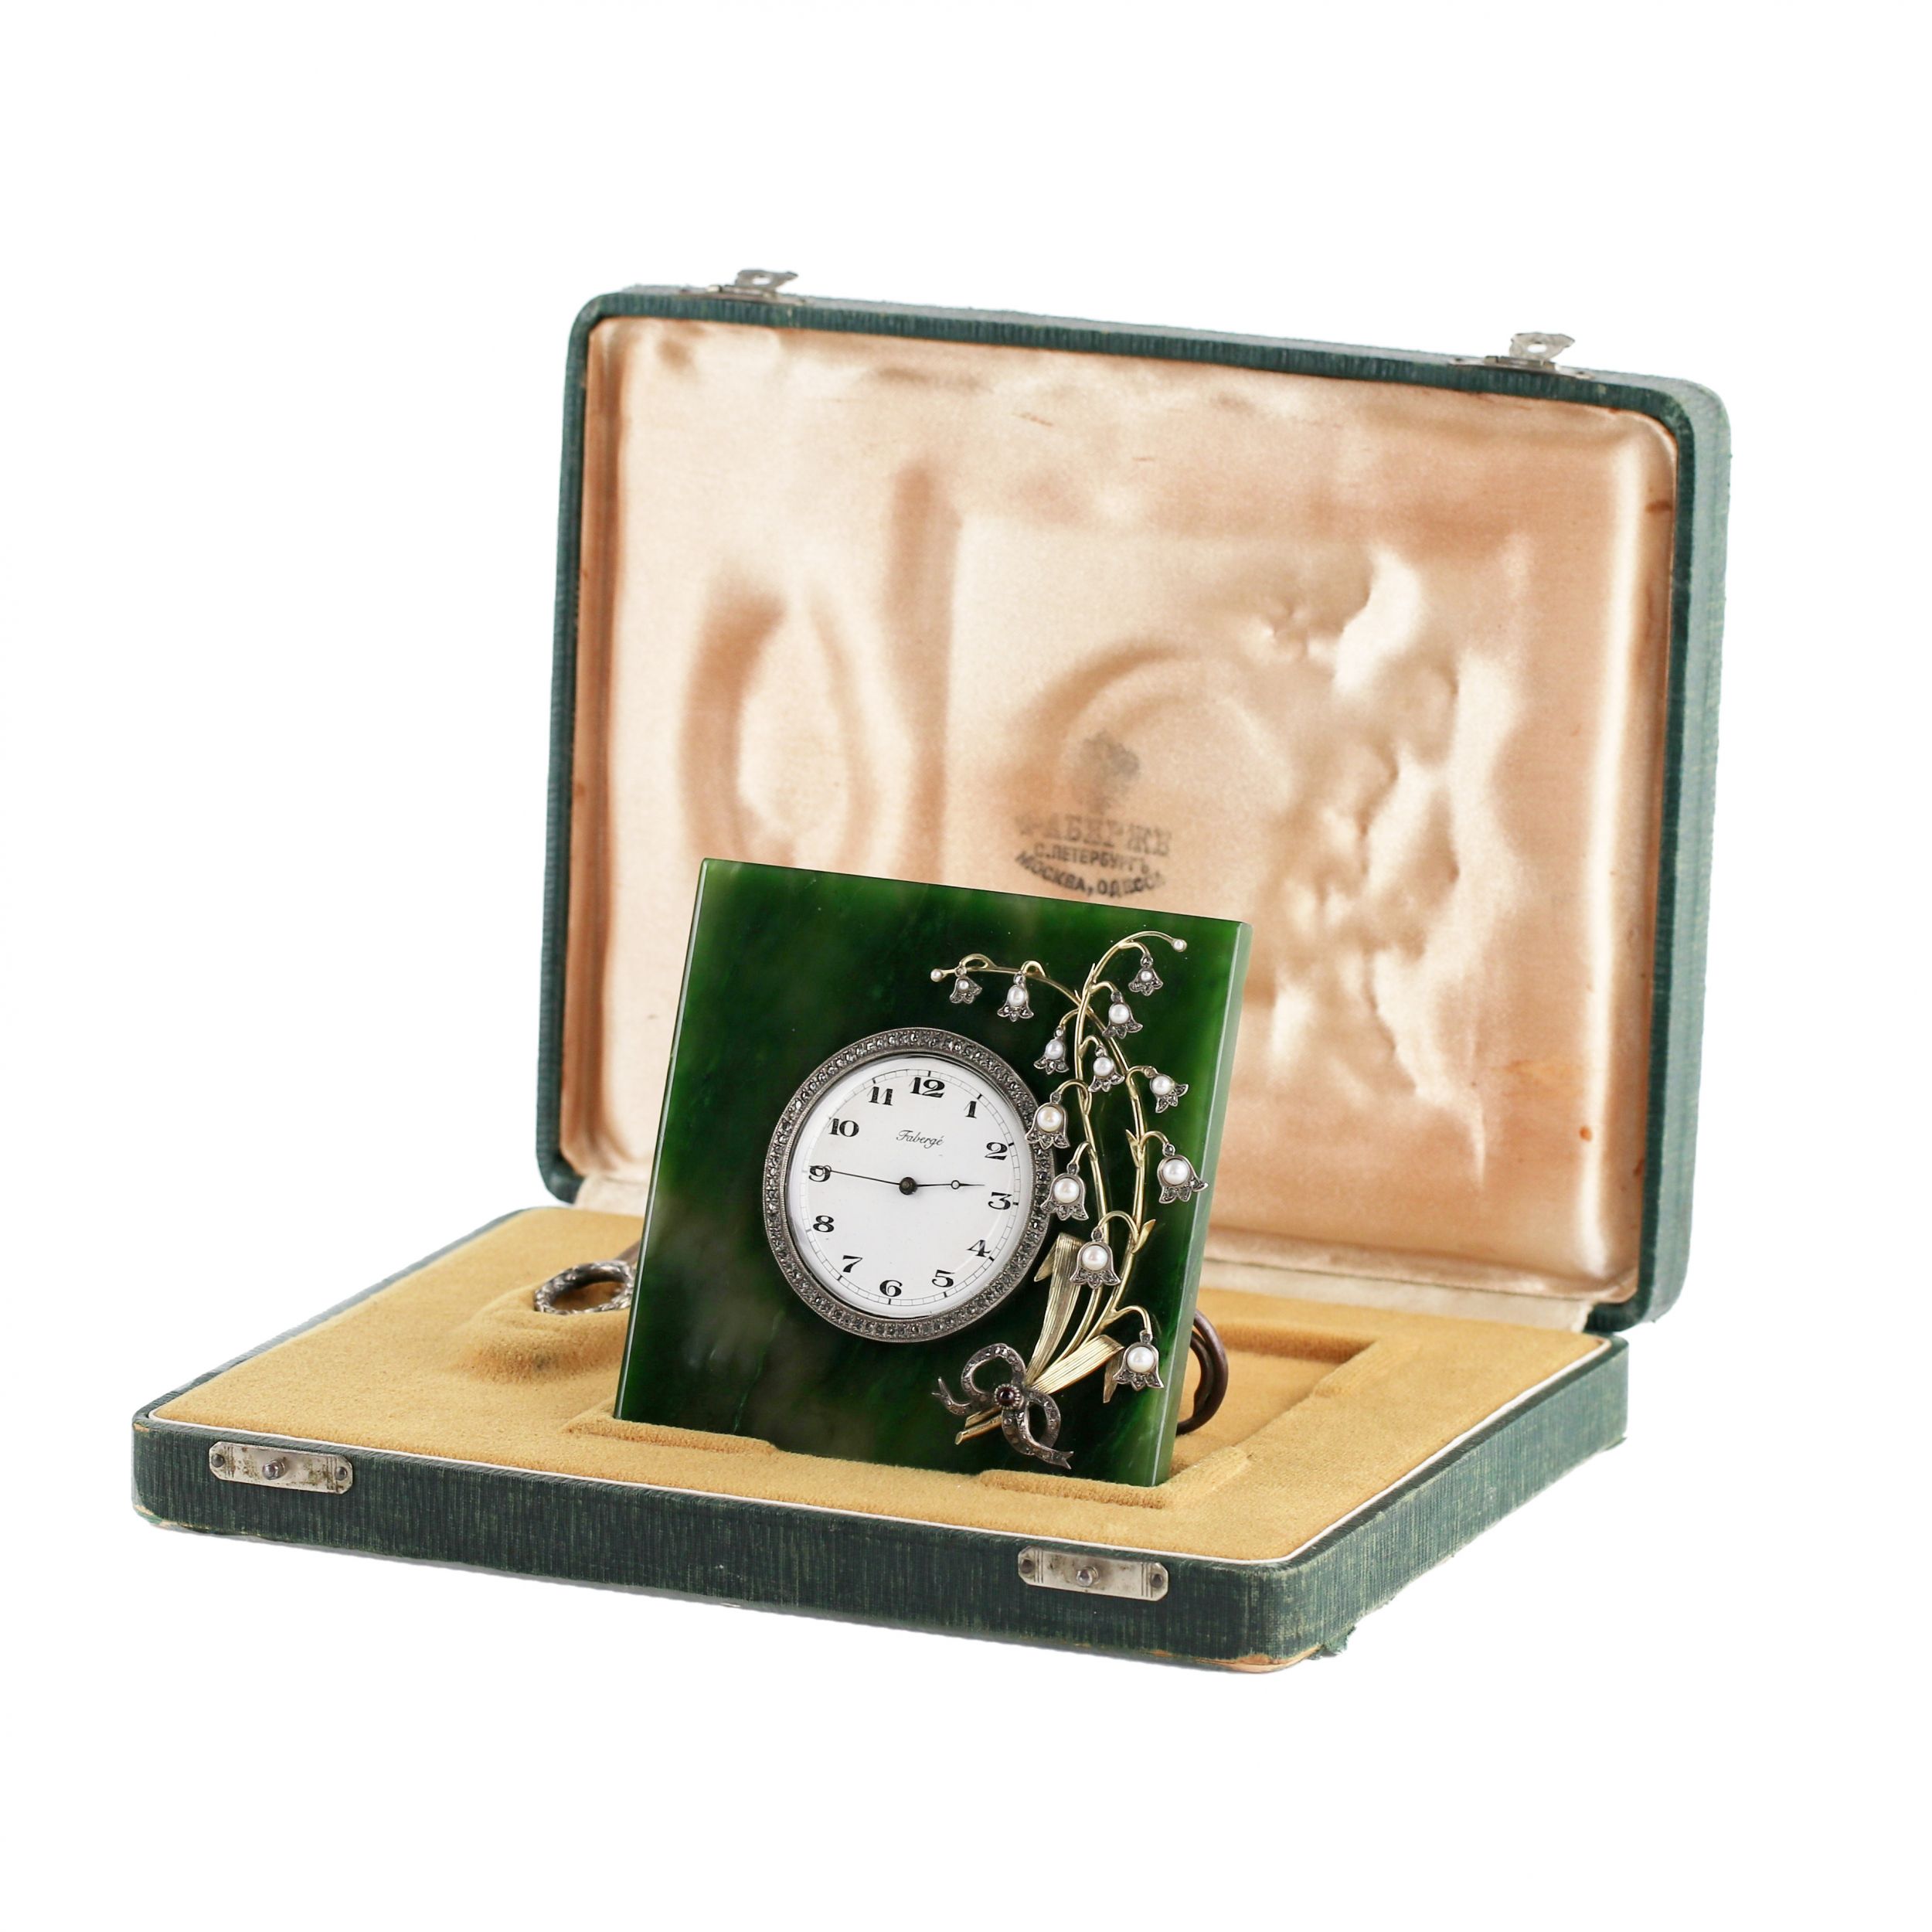 Table-clock-in-gold-silver-and-jade-In-the-style-of-Carl-Faberge-Russia-20th-century-